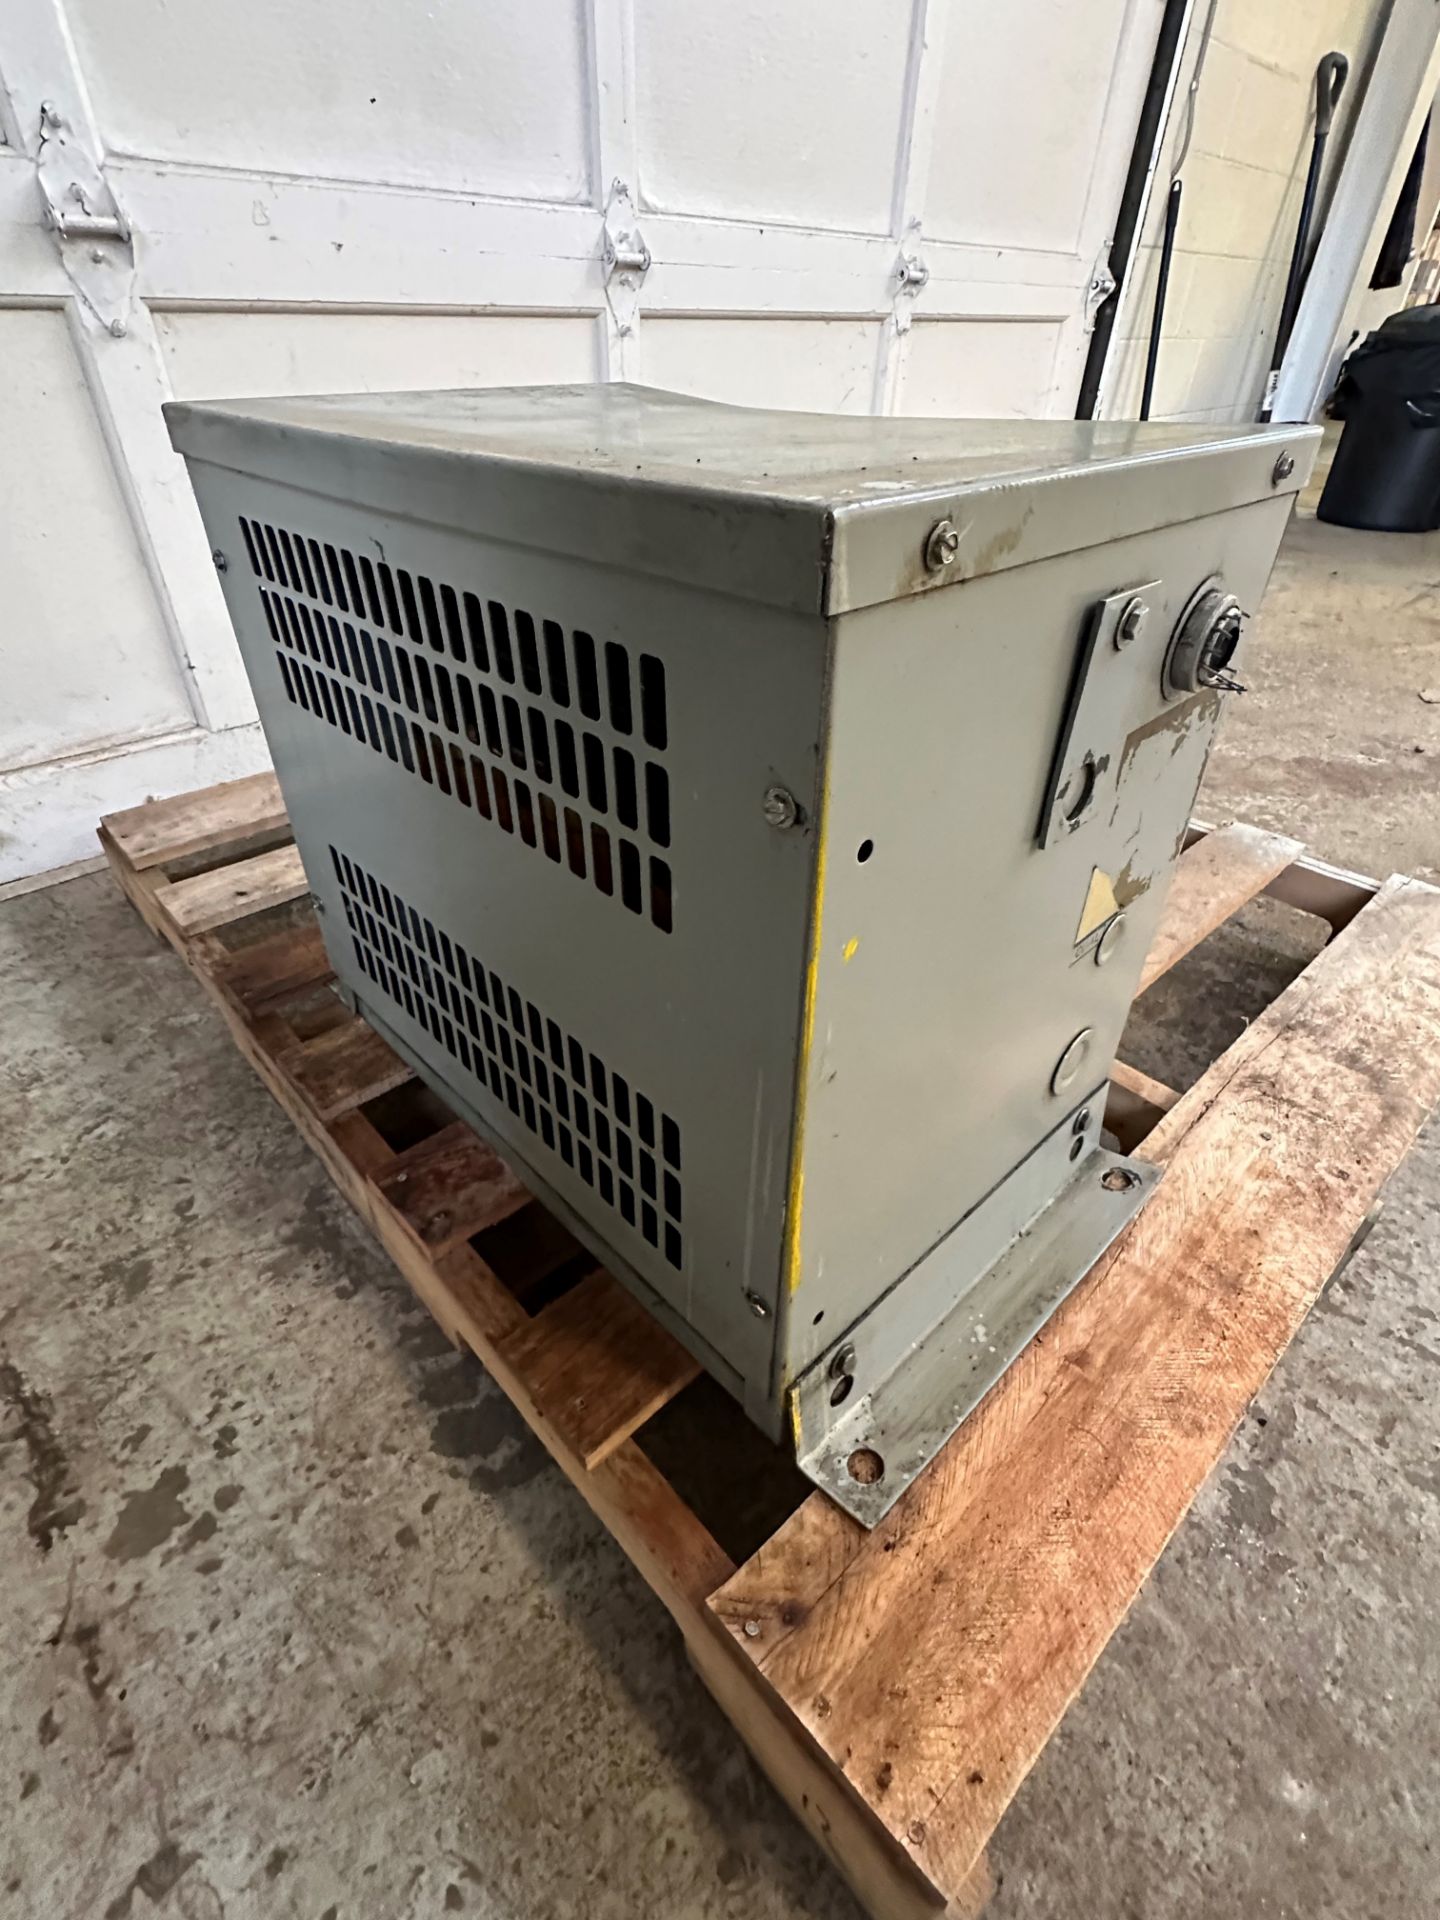 REX MANUFACTURING 75KVA TRANSFORMER, 600V PRIMARY, 480V SECONDARY, 3 PHASE (LOCATED IN BRANTFORD, - Image 2 of 2